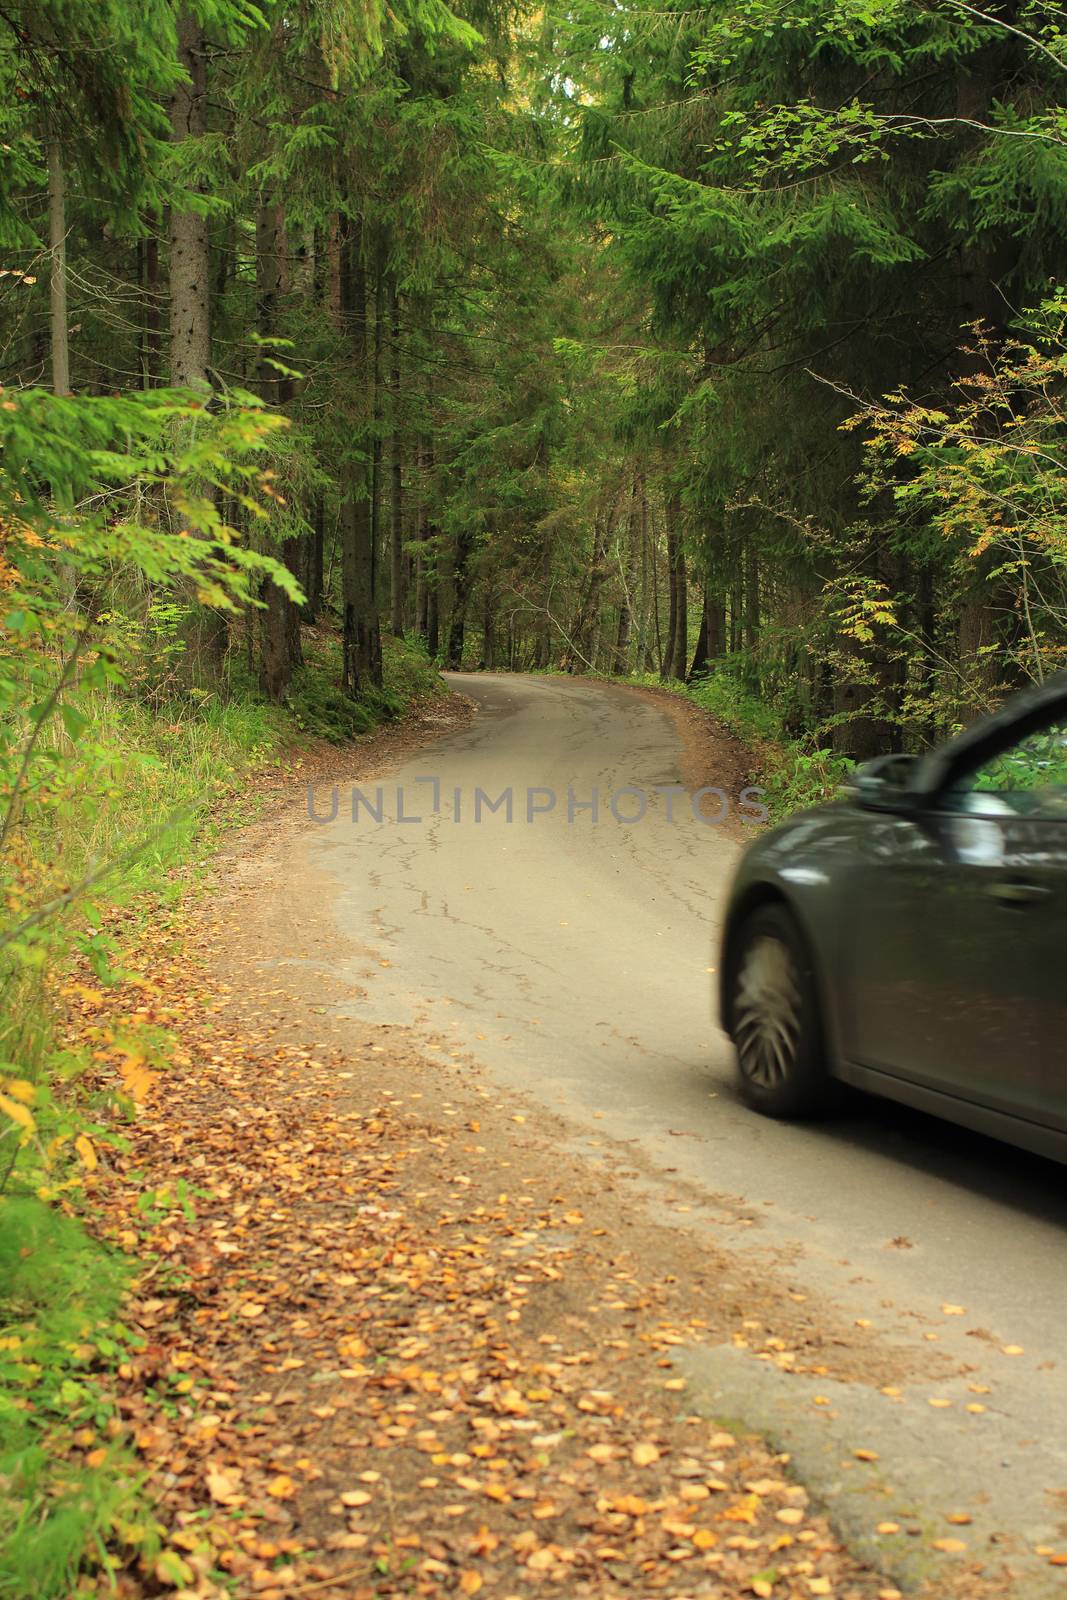 trip by car along a winding forest road in autumn